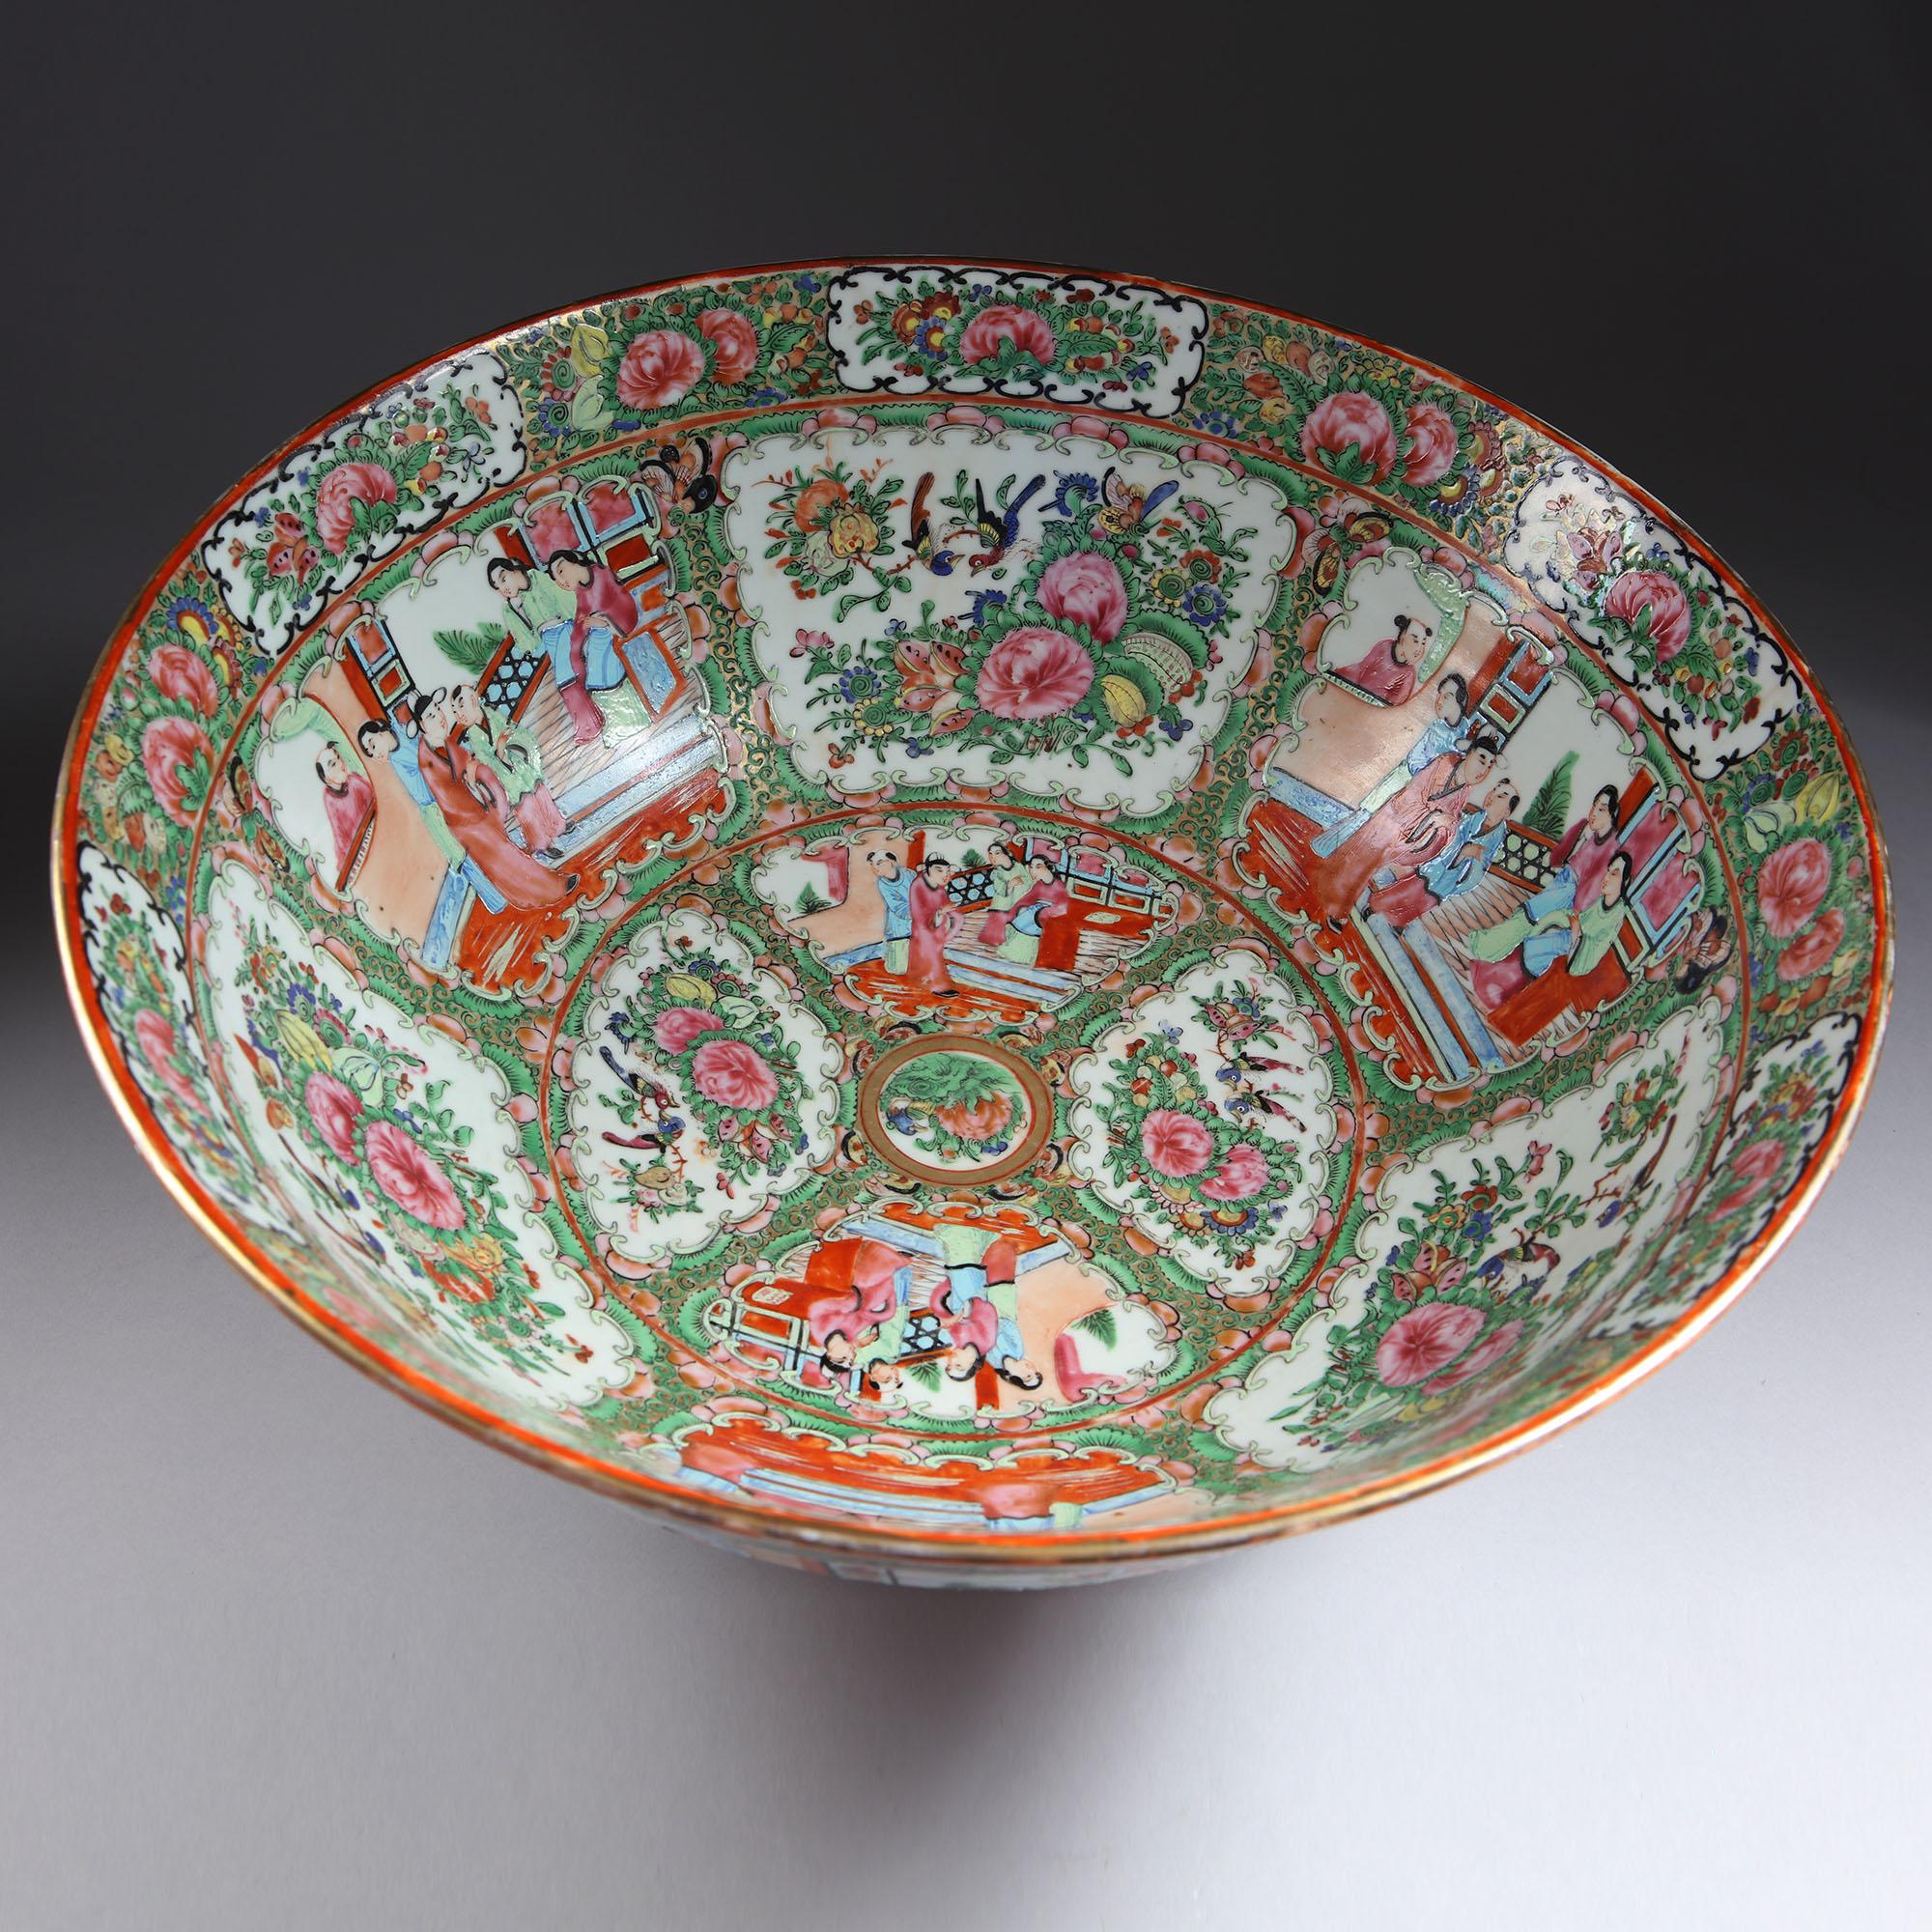 A large 16 inch canton 'Rose Medallion' porcelain punch bowl, the base unmarked.
Chinese Export, circa 1870

Measures: Diameter 40cm - 16 in
Height 15.5cm - 6in.